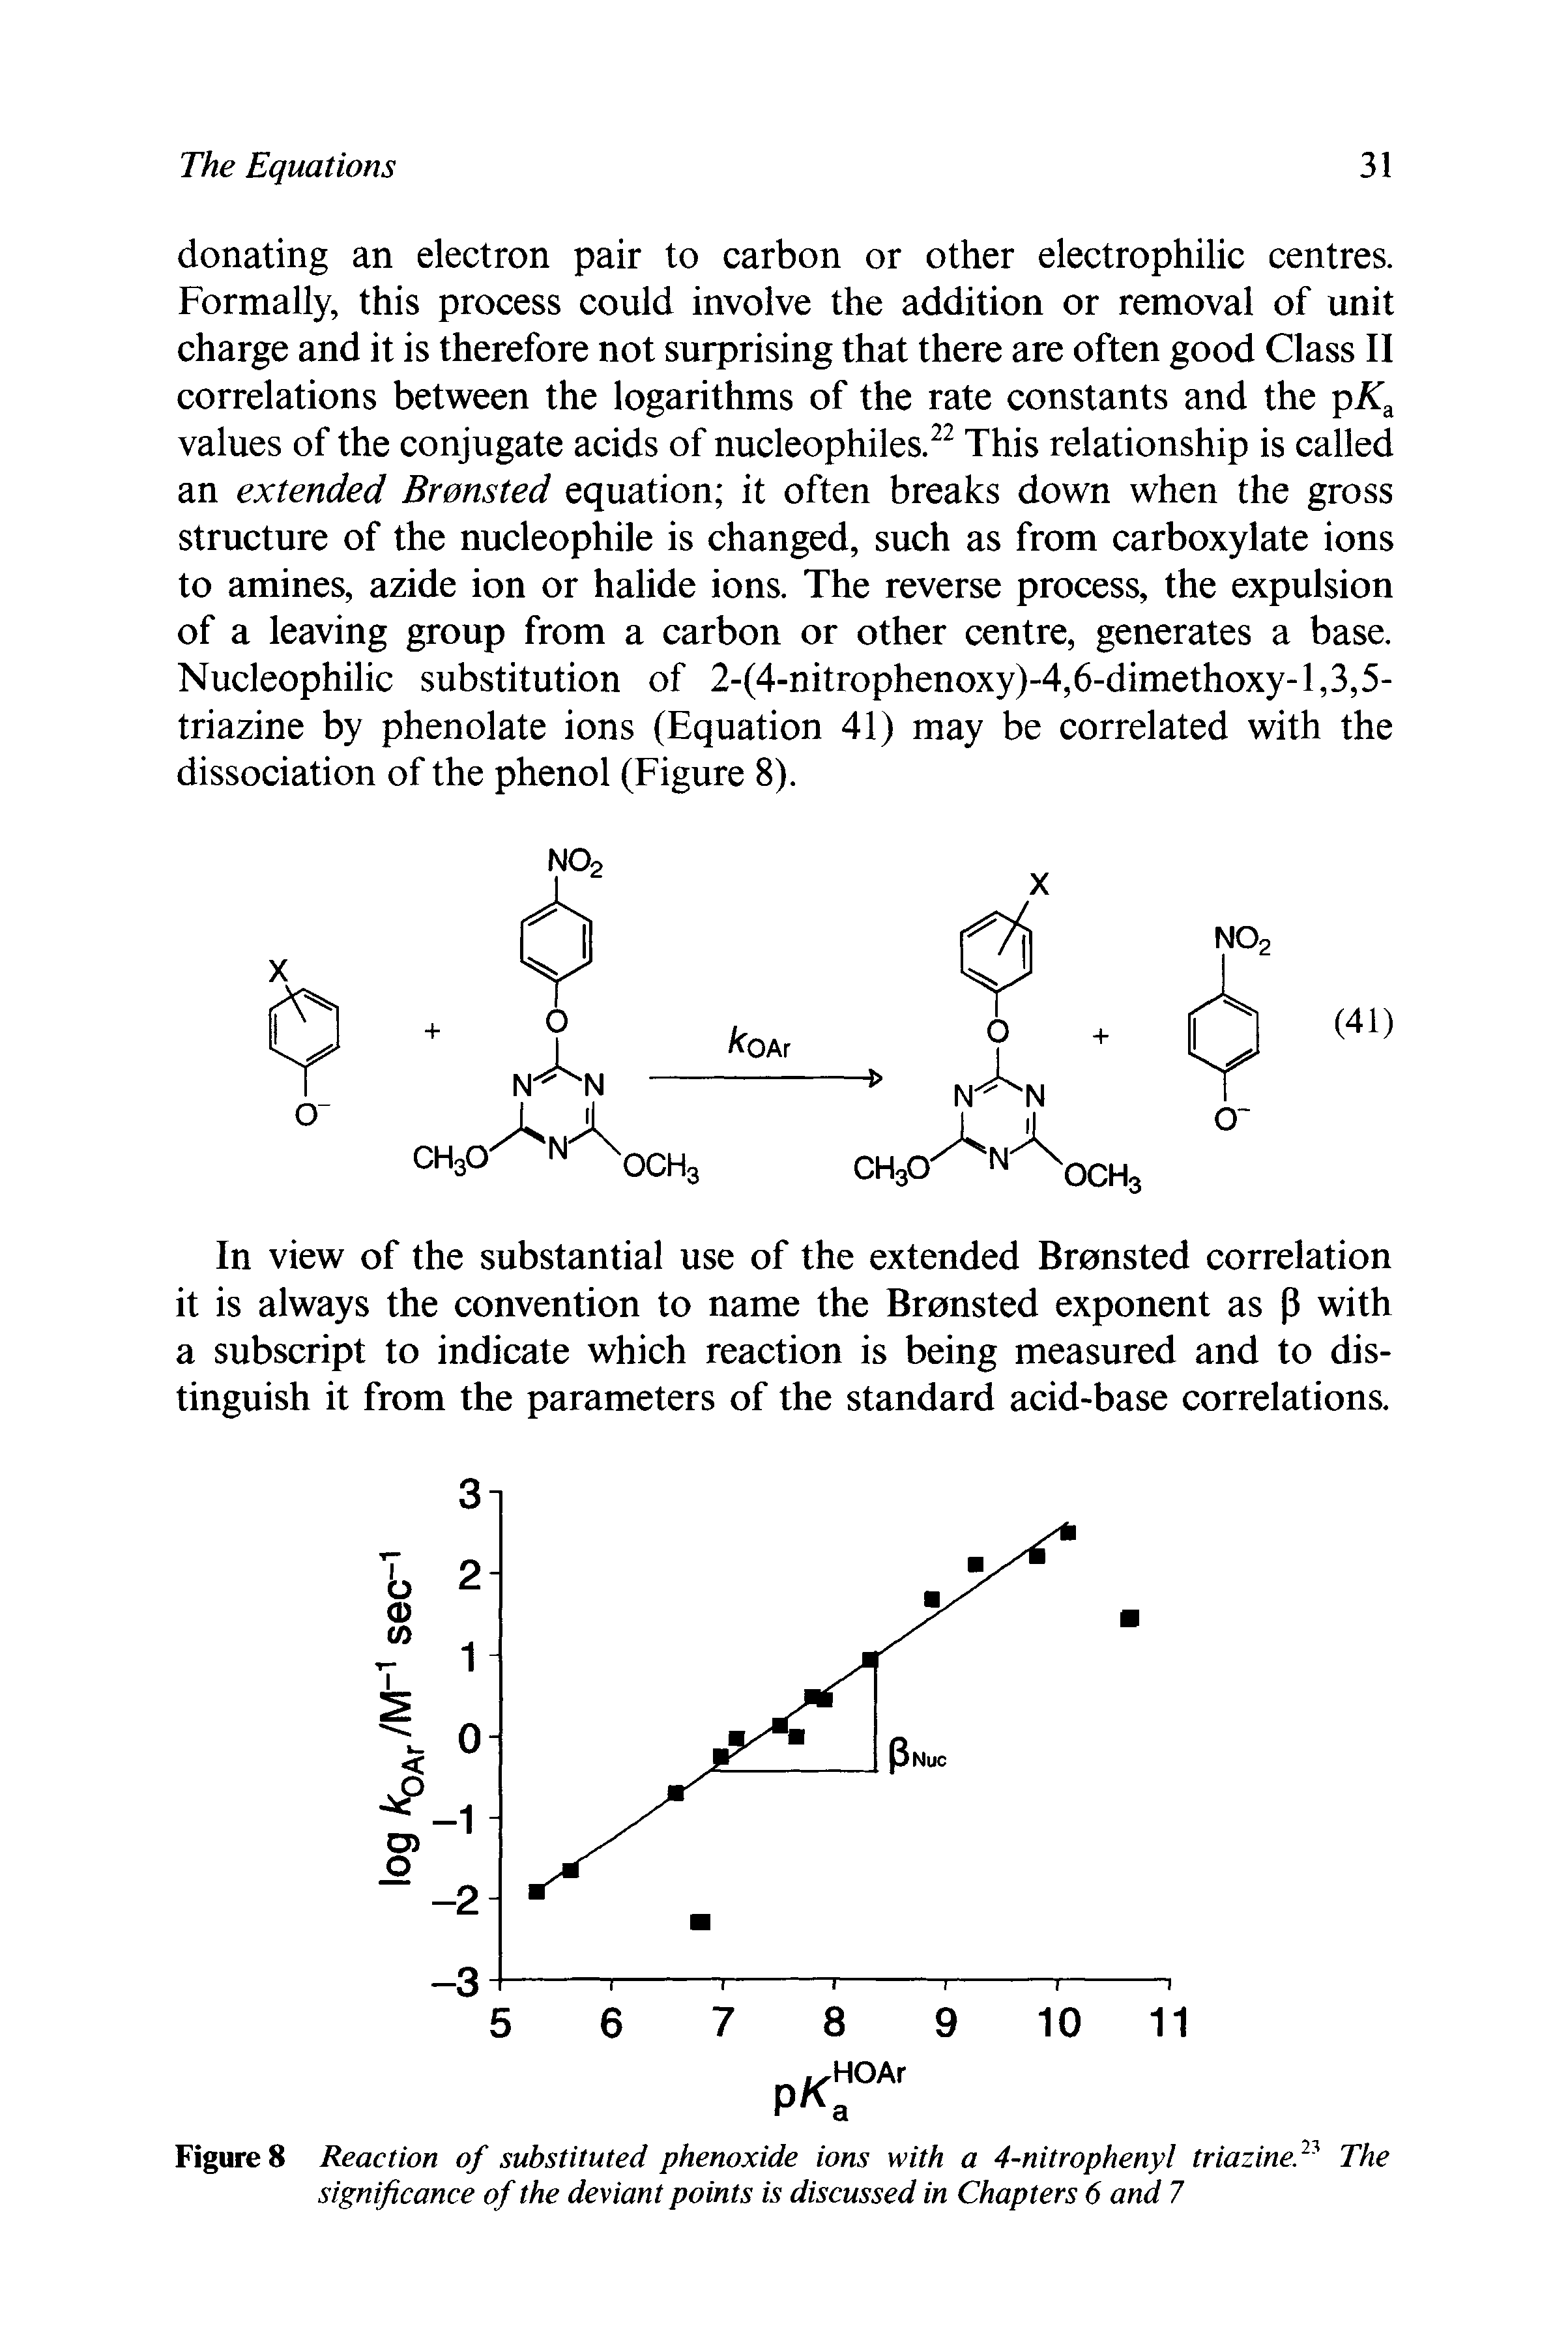 Figures Reaction of substituted phenoxide ions with a 4-nitrophenyl triazinef The significance of the deviant points is discussed in Chapters 6 and 7...